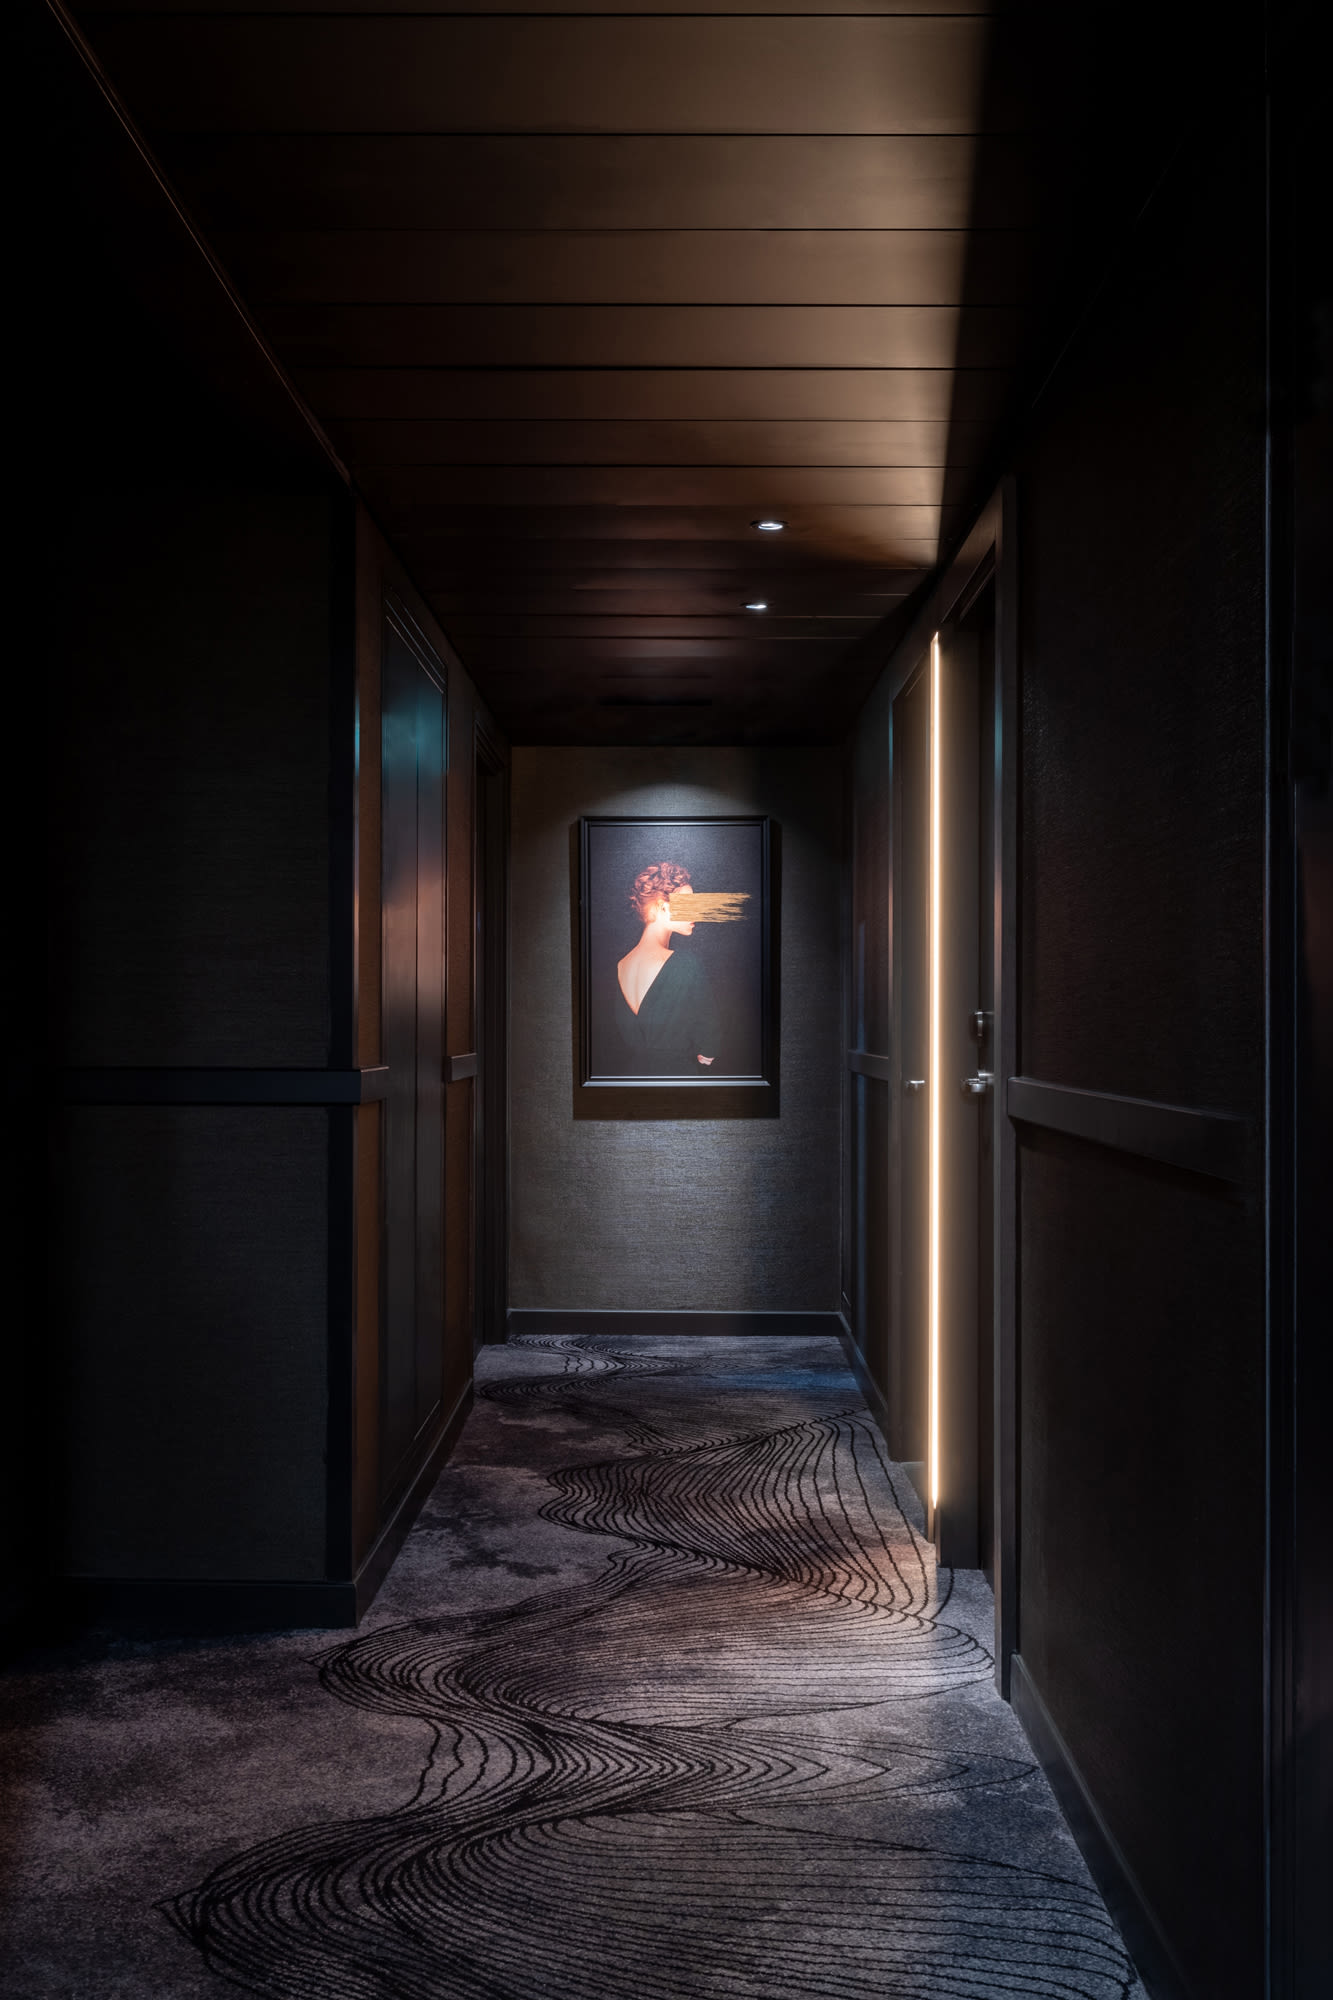 The corridors are sumptuous with a bespoke carpet design based on audio waves and transmissions, burnished gold metal detailing and a dark colour palette